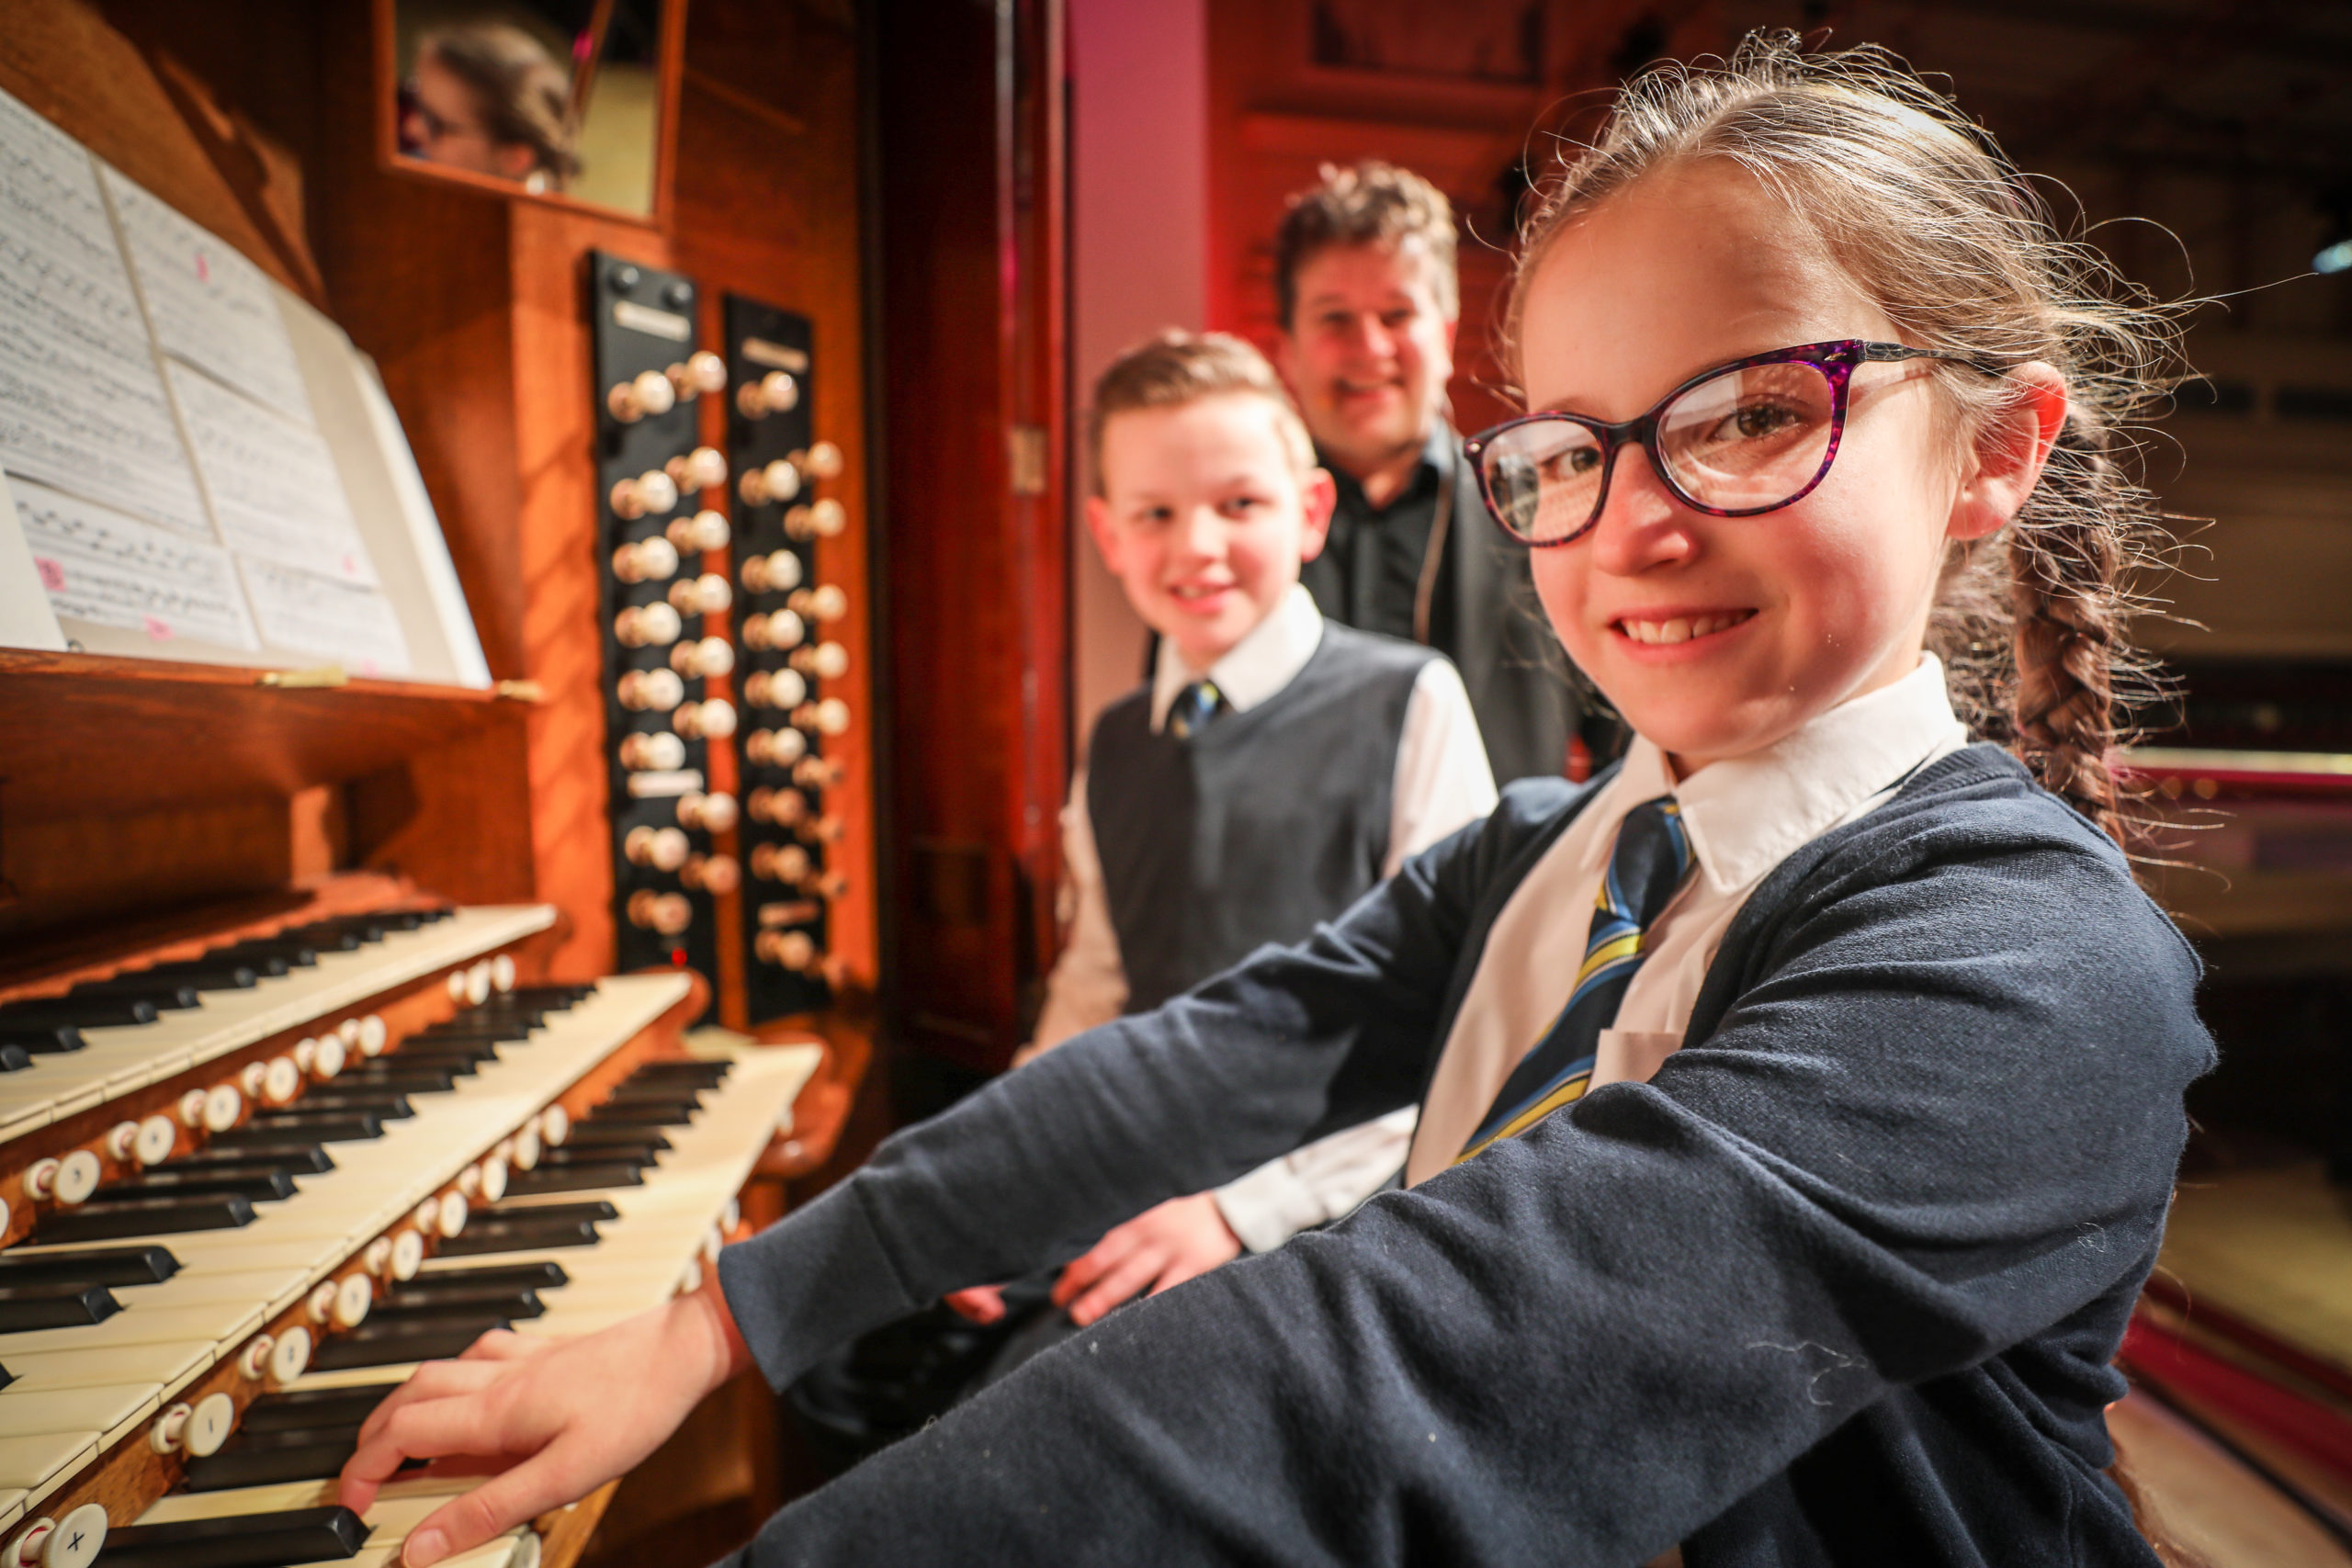 Concert organist Dan Moult in February with gifted young pianist Elizabeth Levins (9) and Euan Thomson (10) both from St Joseph's at the Caird Hall organ in early 2020.